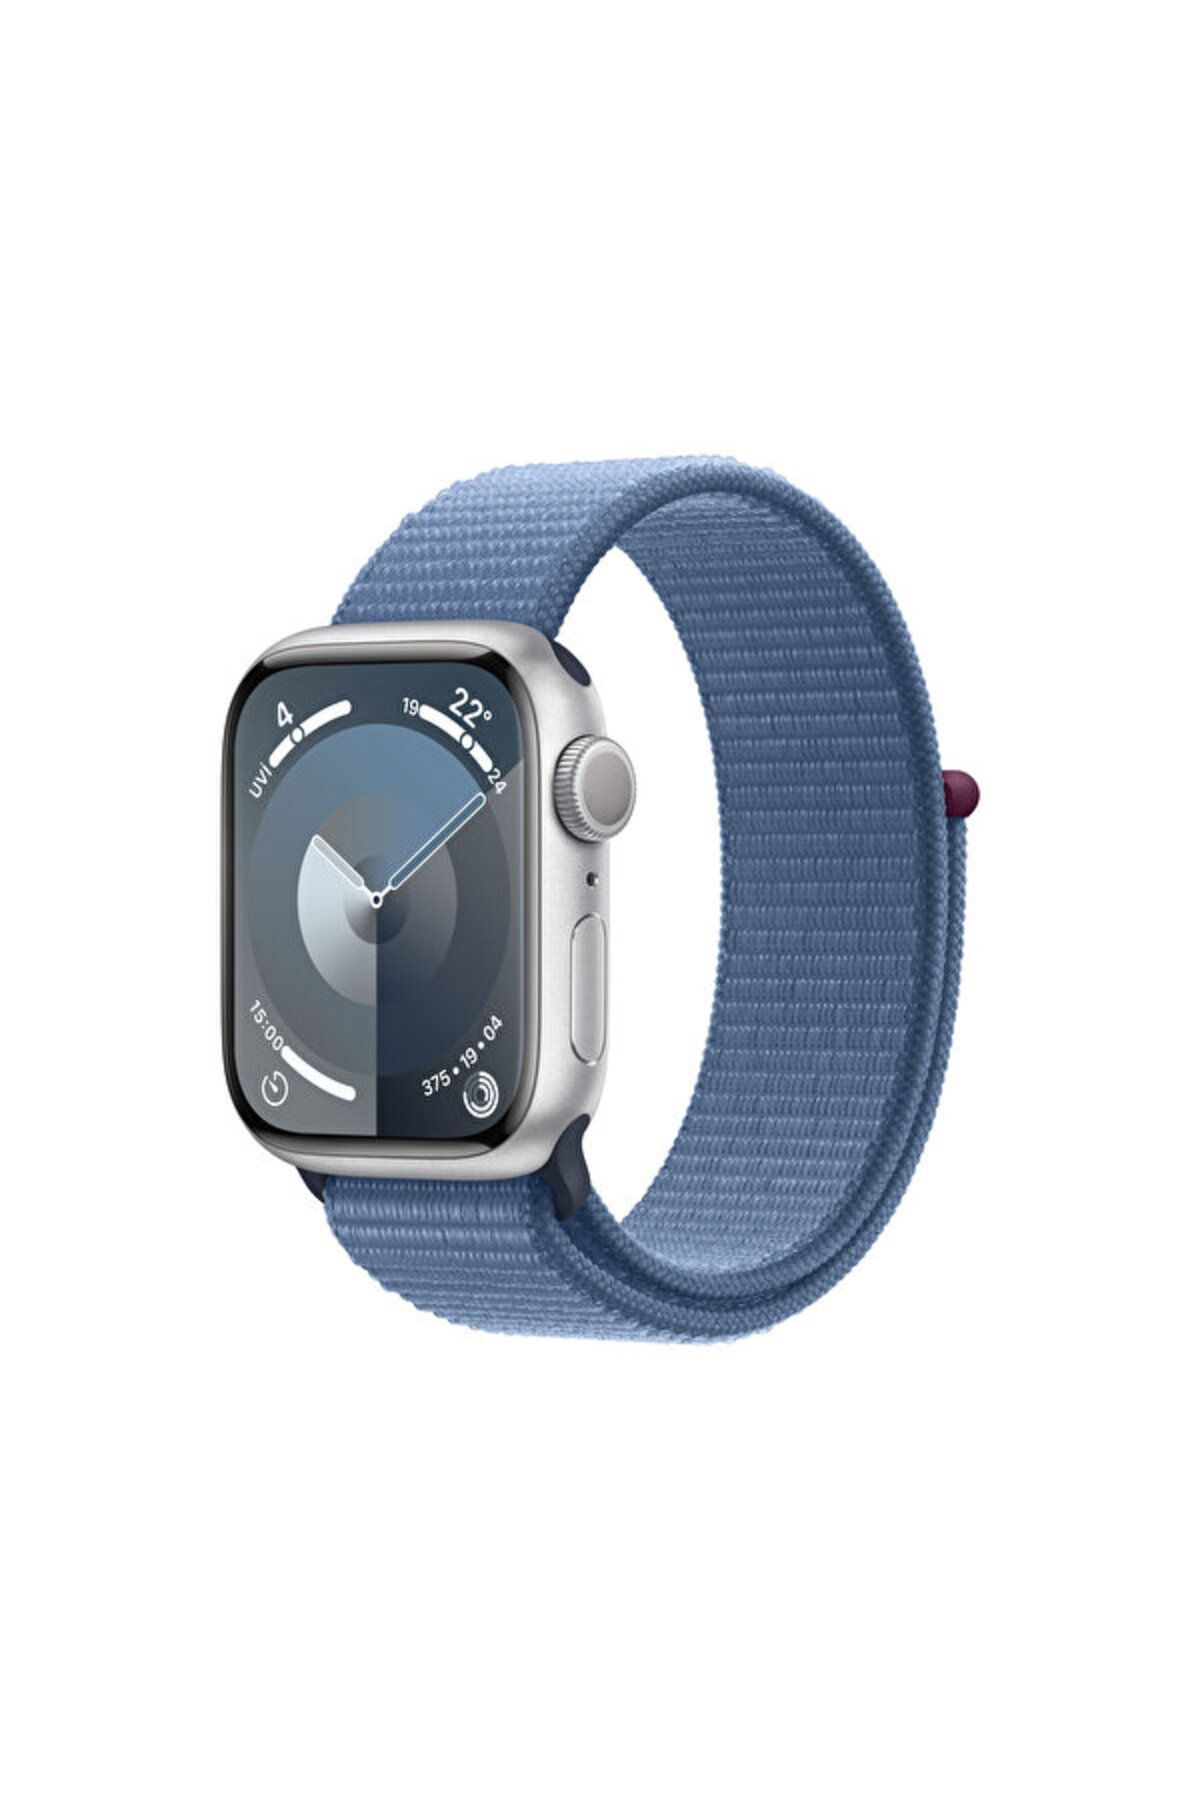 Apple Watch Series 9 GPS 41mm Silver Aluminium Case with Storm Blue Sport Band - S/M